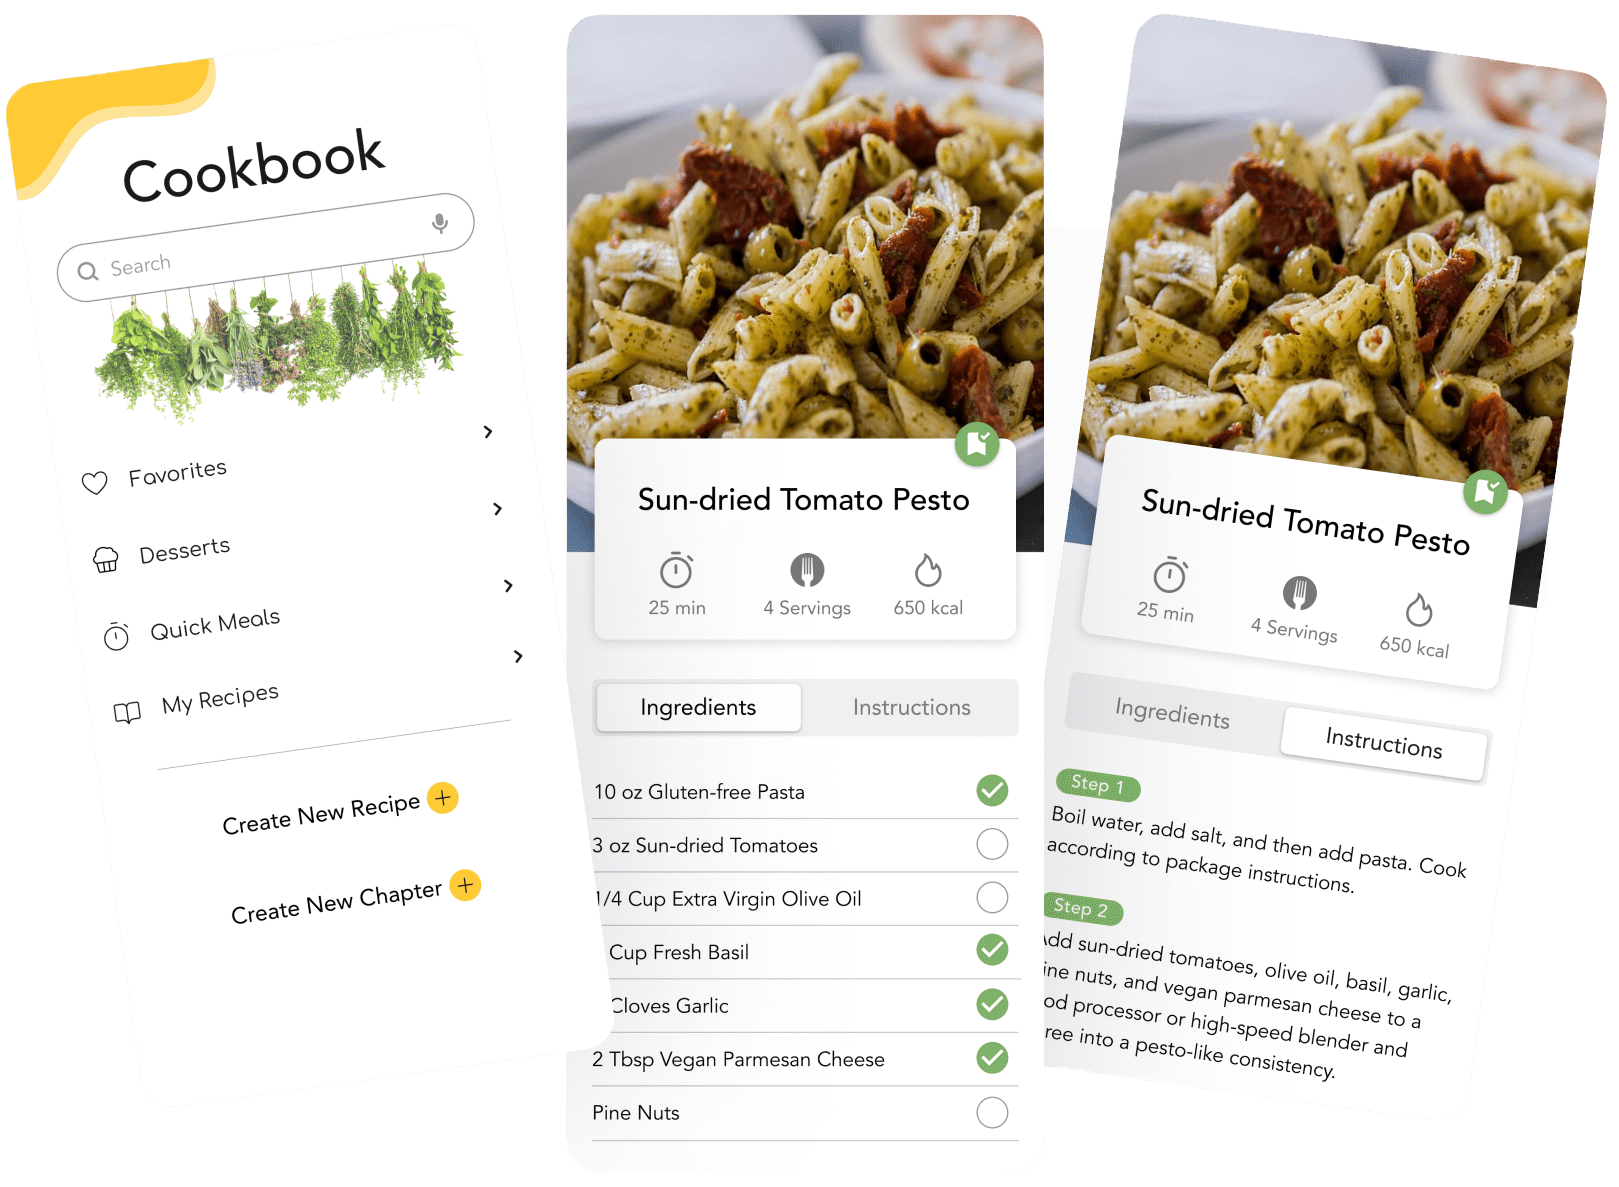 Pantry Solutions mockups: Cookbook, Sun-dried Tomato Pesto ingredients, Sun-dried Tomato Pesto instructions